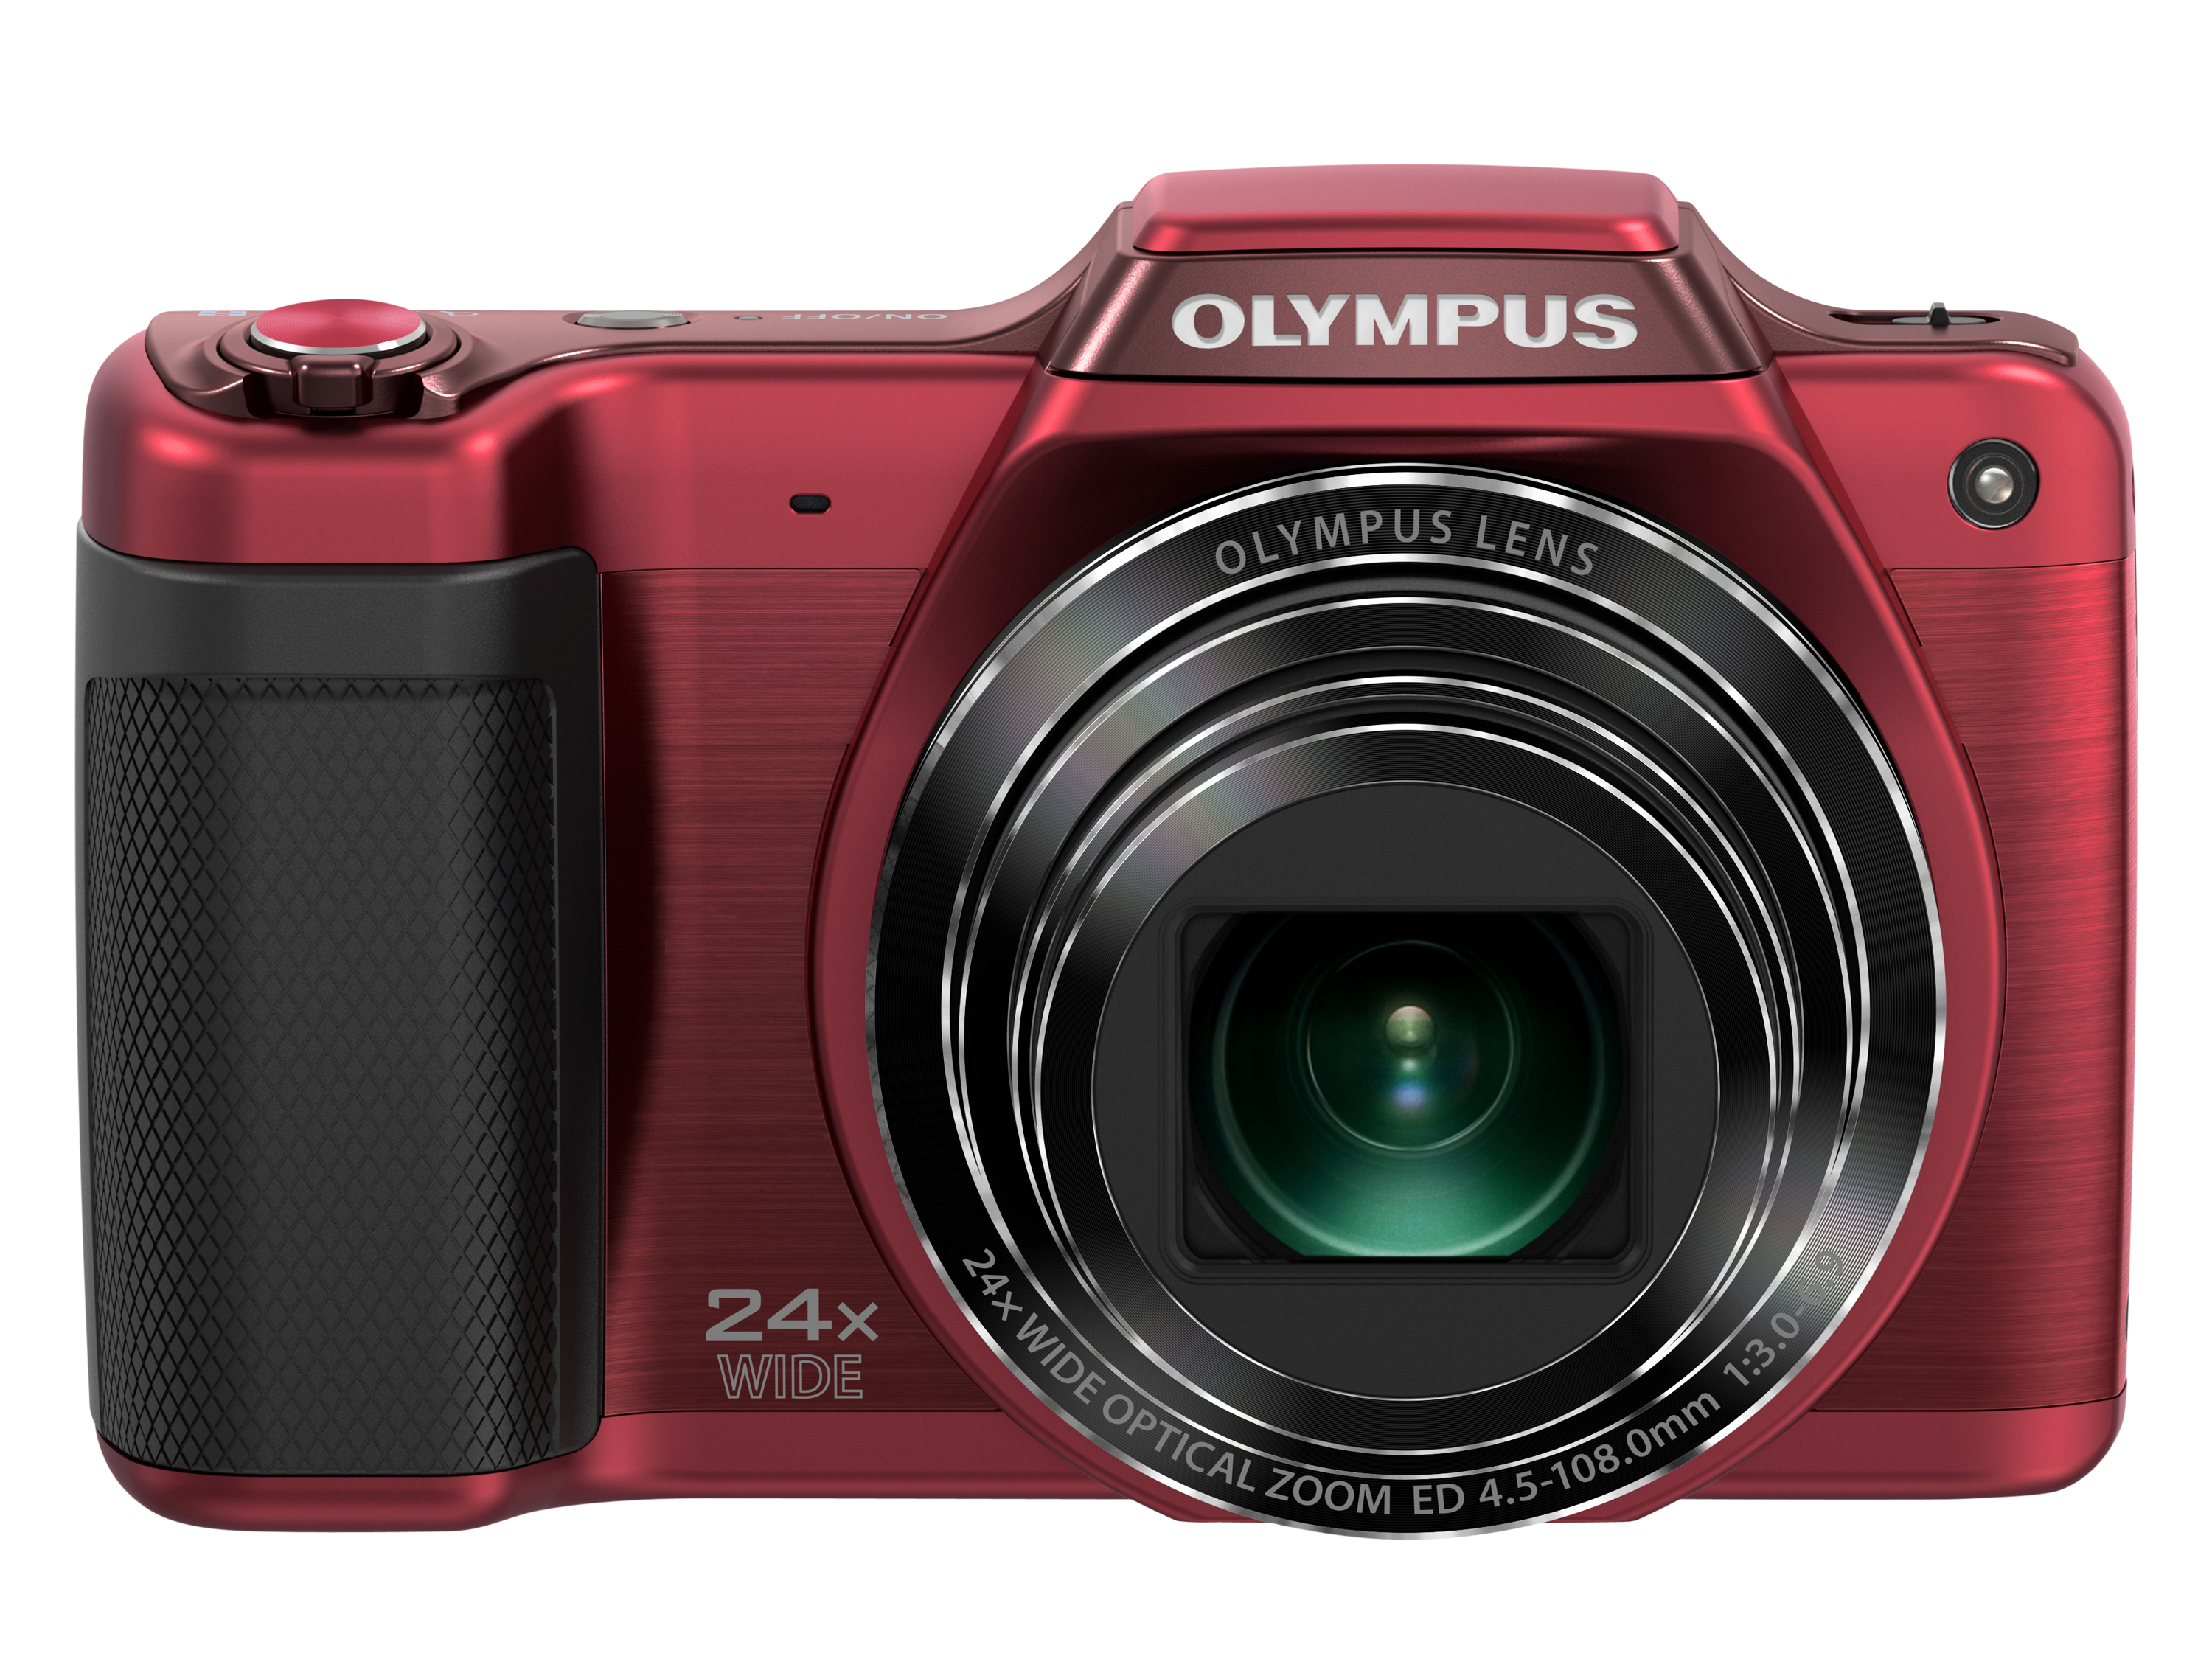 Olympus STYLUS Traveller SZ-15.Foto: Olympus, All Rights Reserved